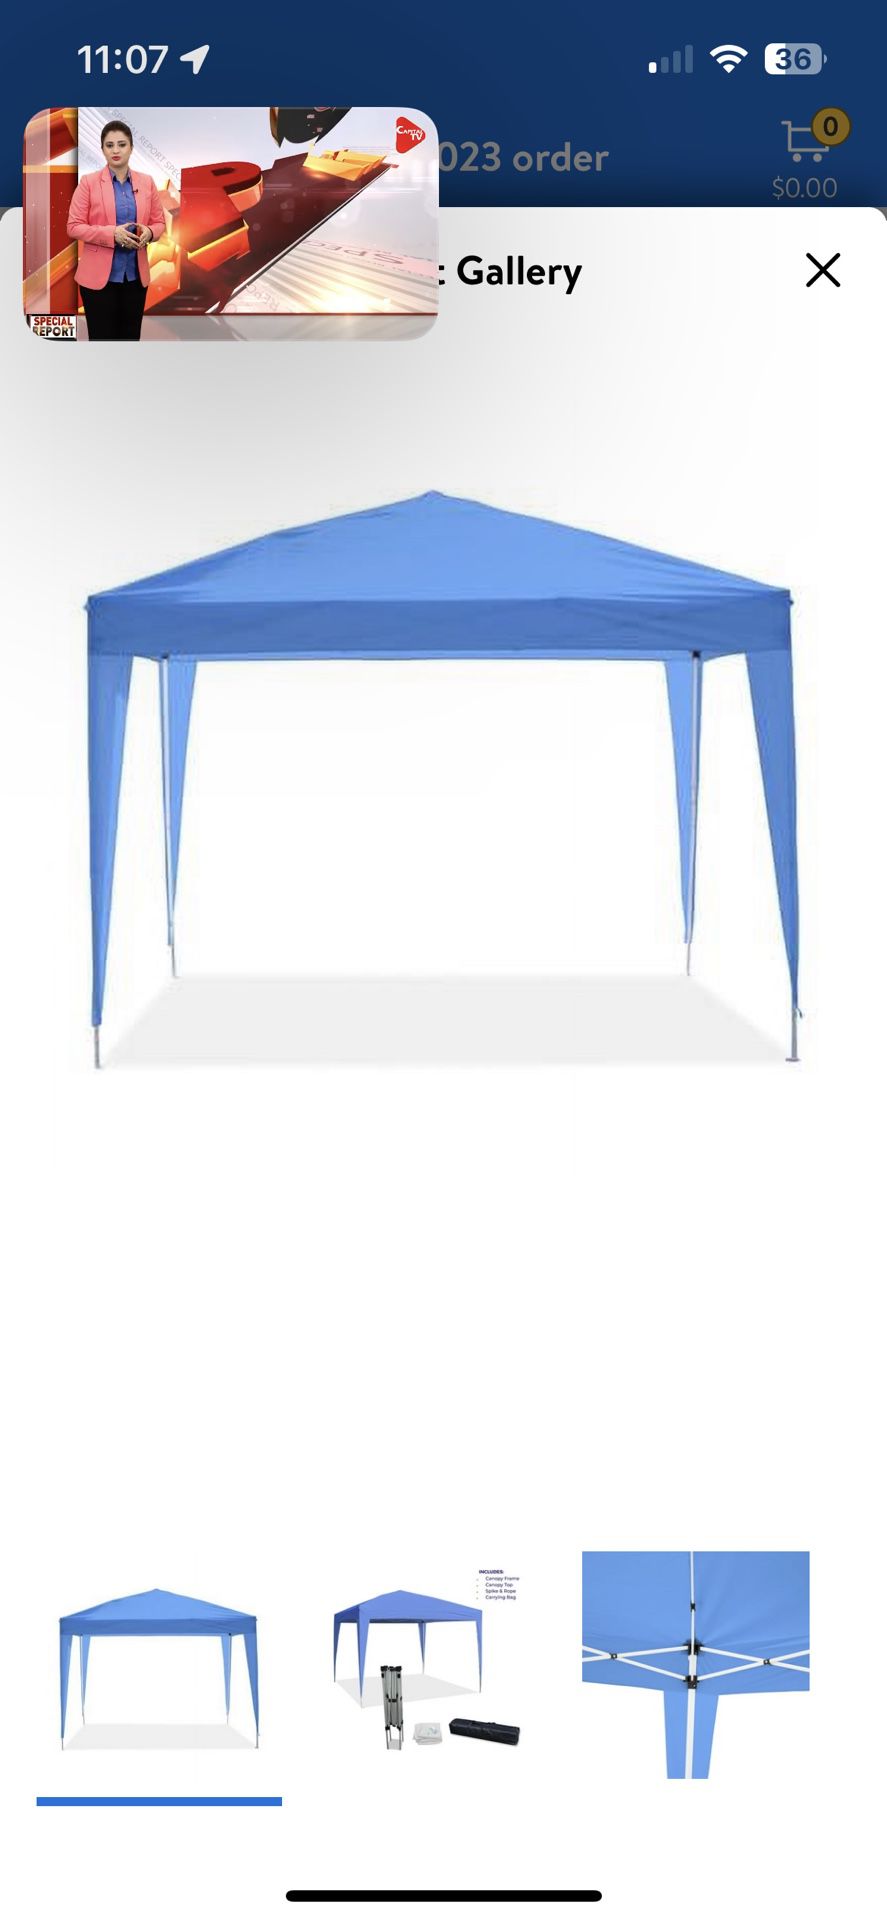 Impact Canopy 10' x 10' Canopy Tent Gazebo with Dressed Legs, Blue